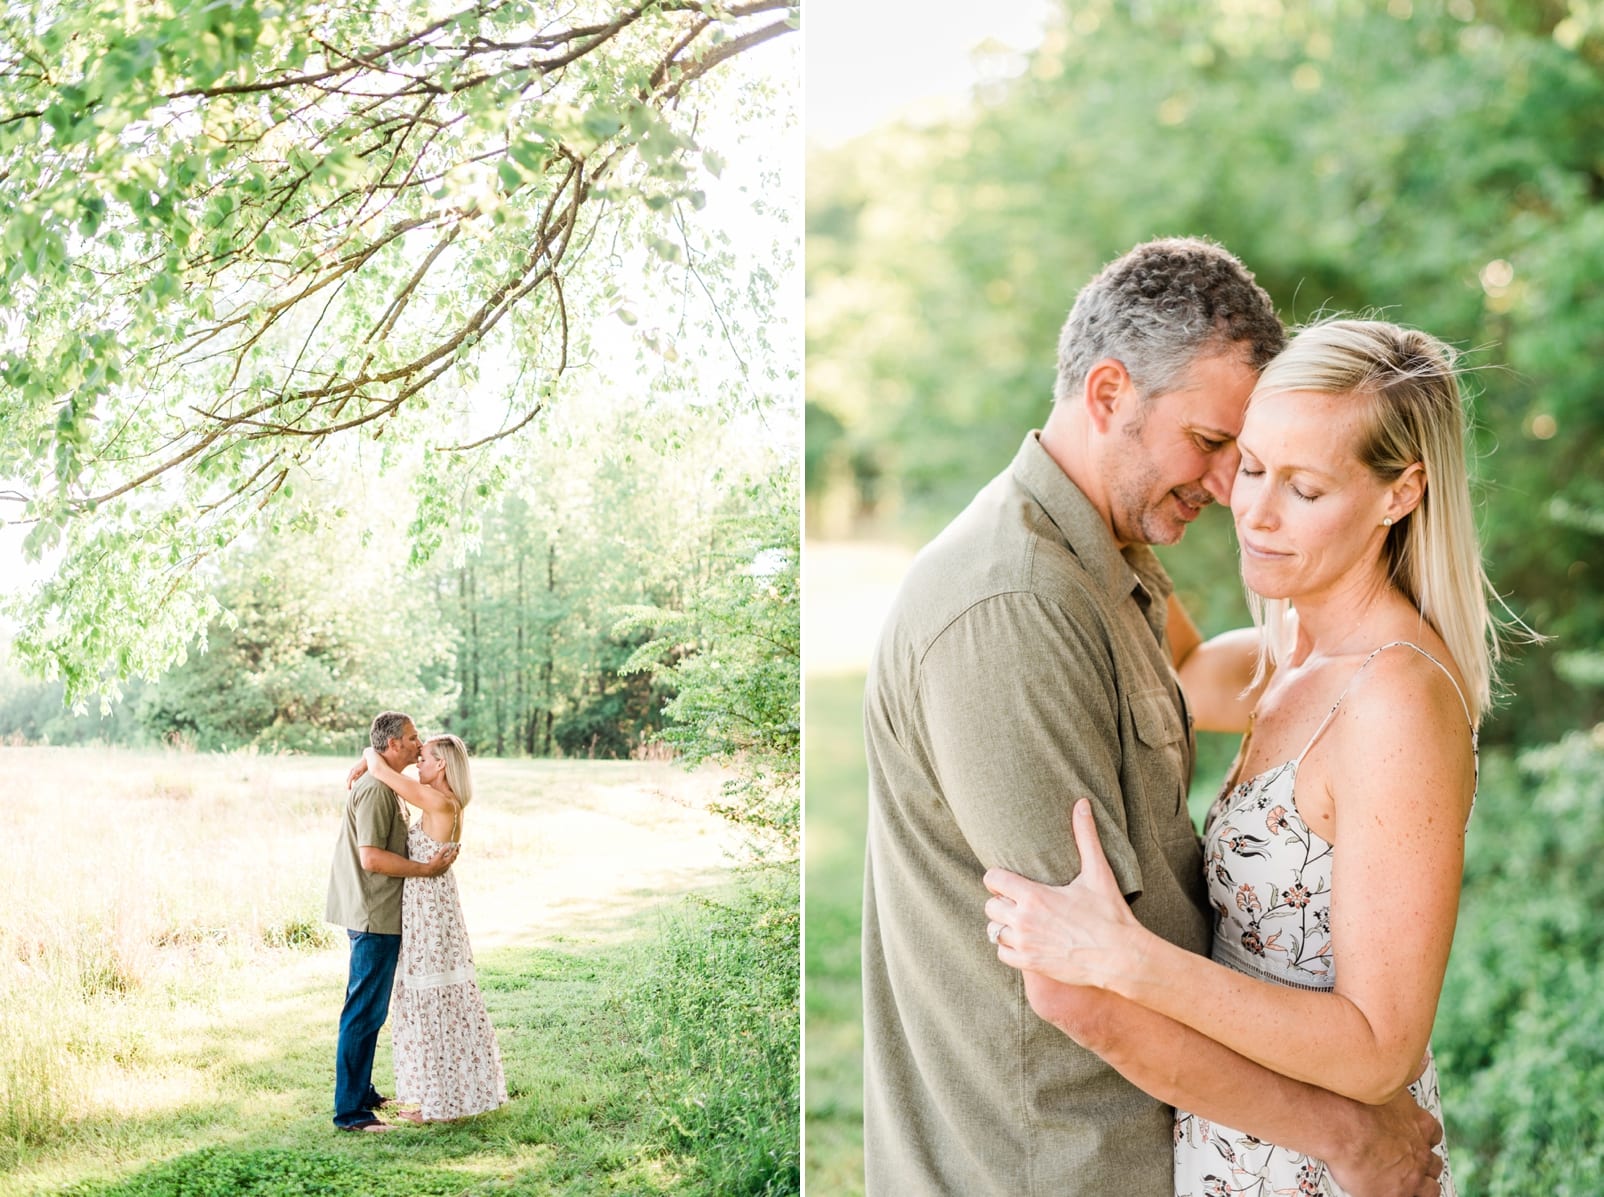 Wake Forest couple snuggling and embracing during engagement session photo